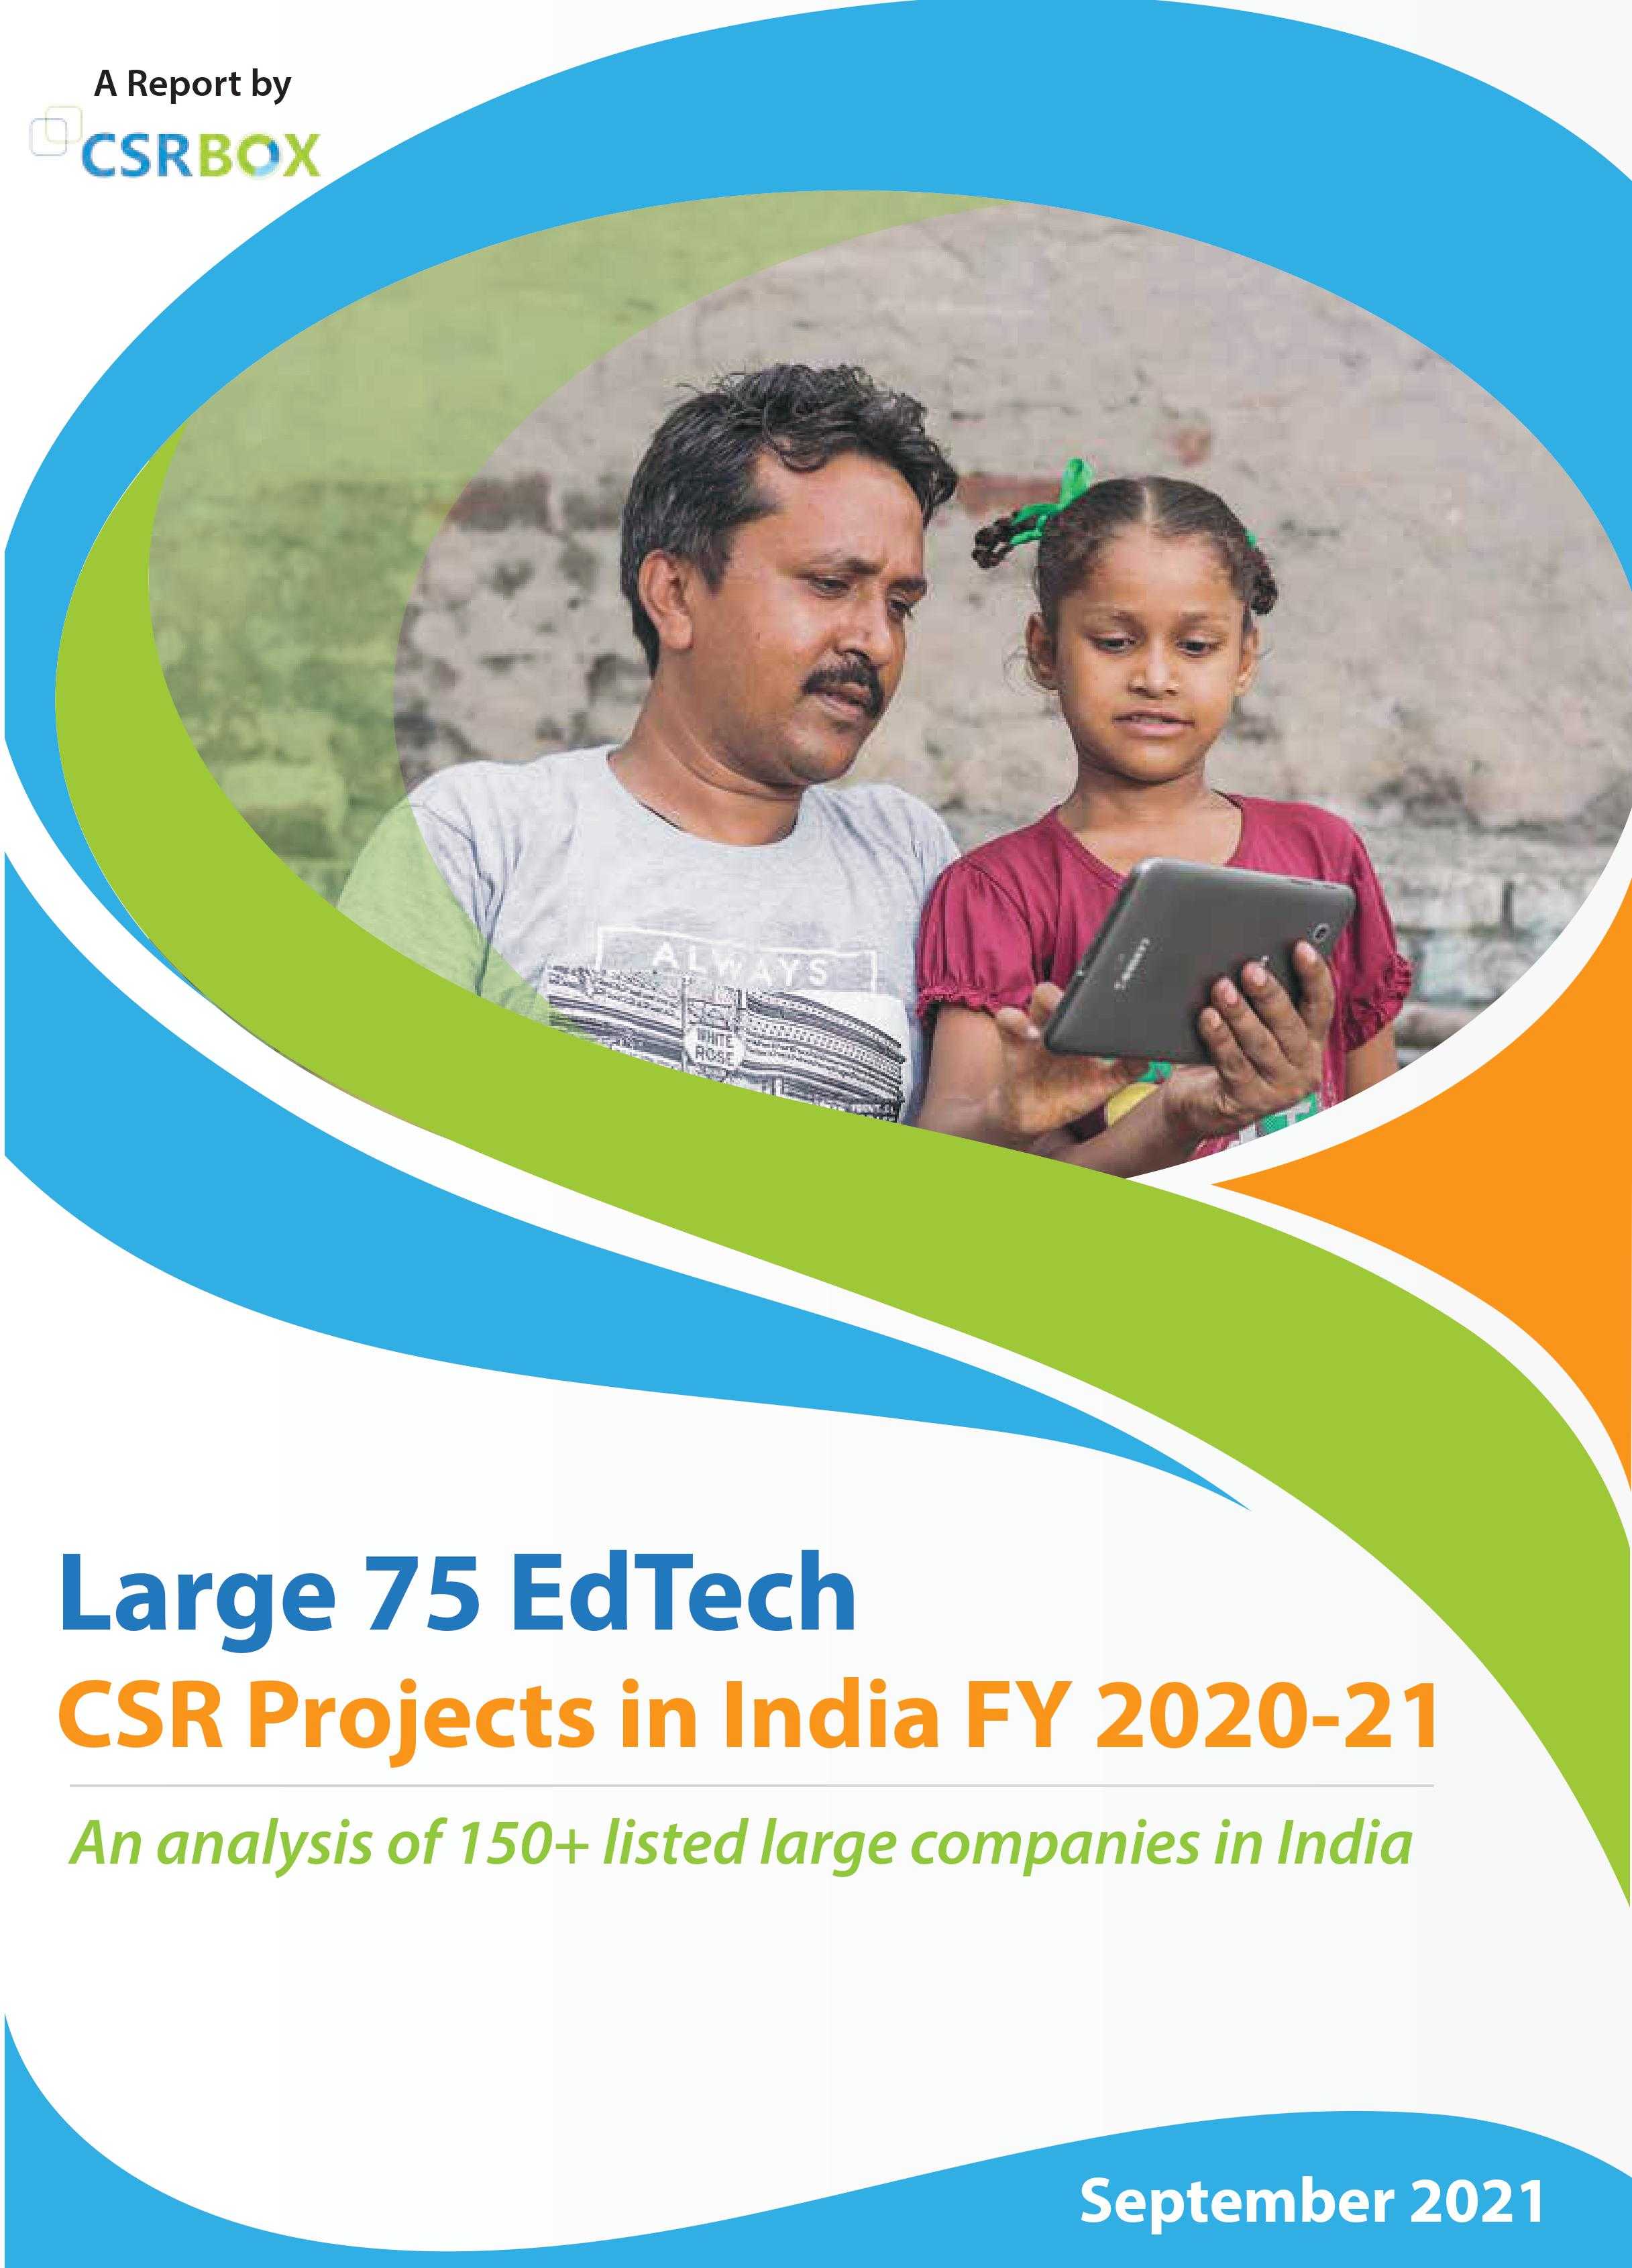 Large 75 EdTech CSR Projects in India FY 2020-21